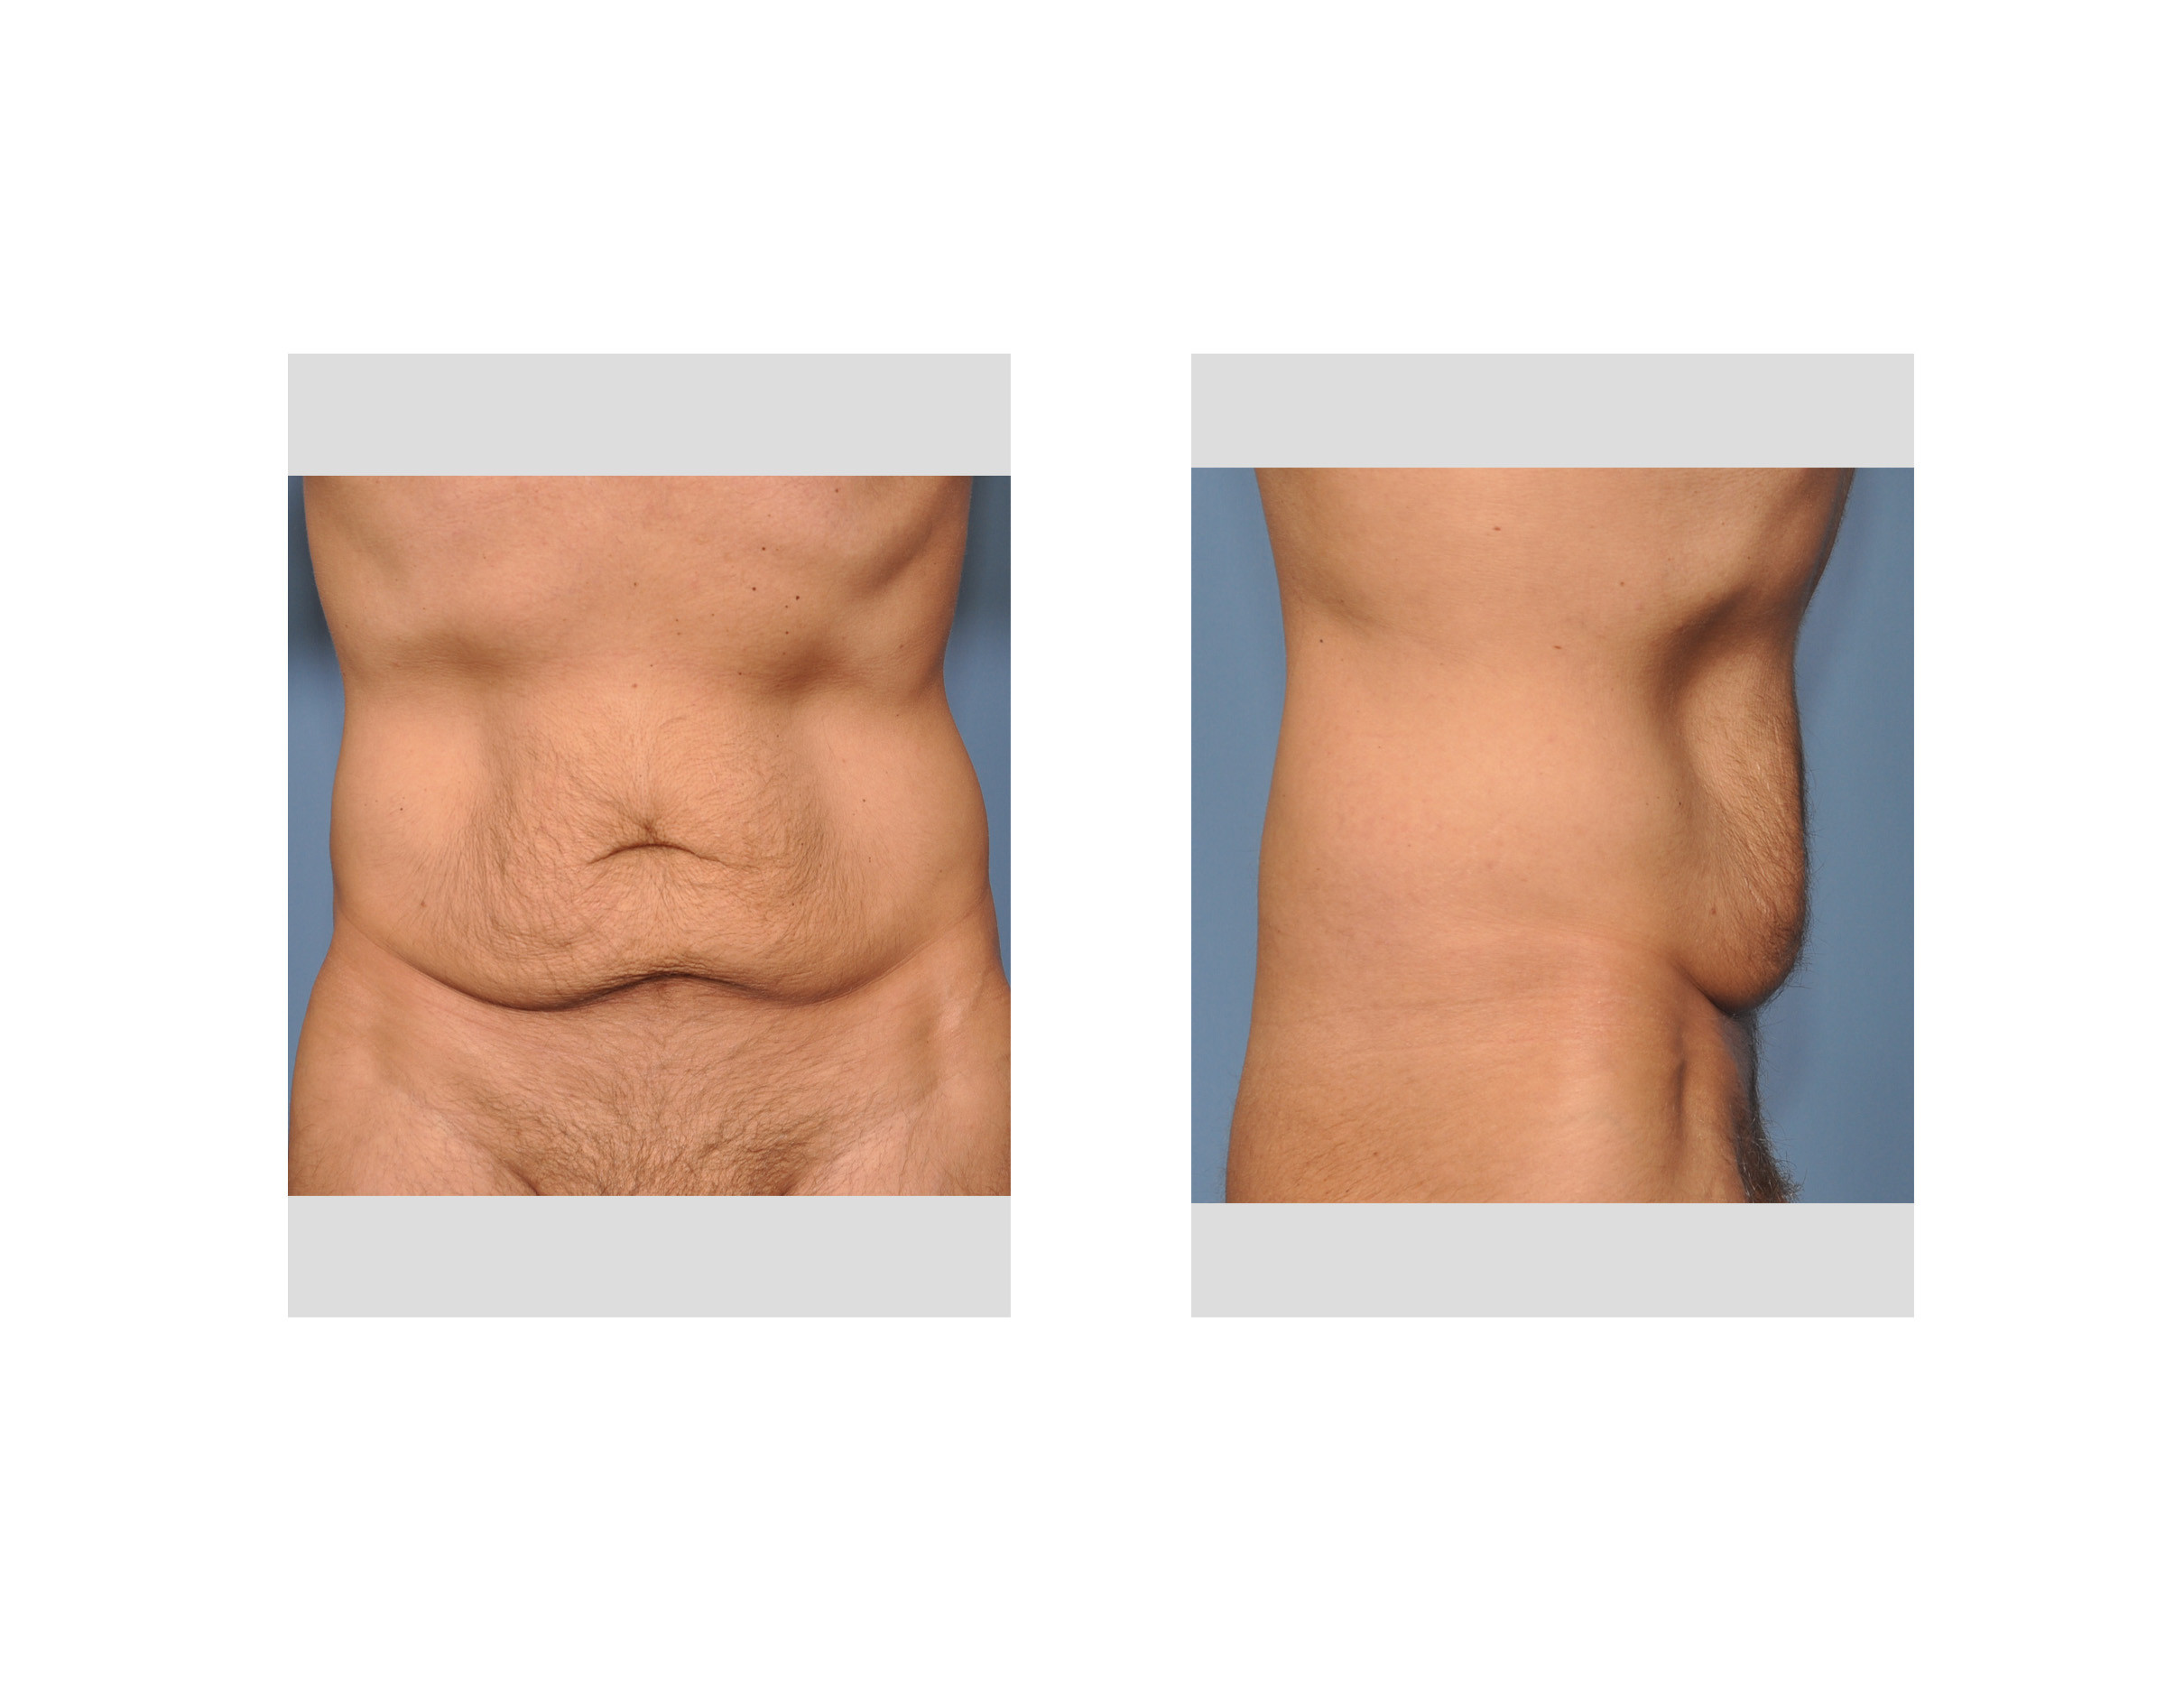 Tummy Tuck After Weight Loss Surgery
 male tummy tuck Archives